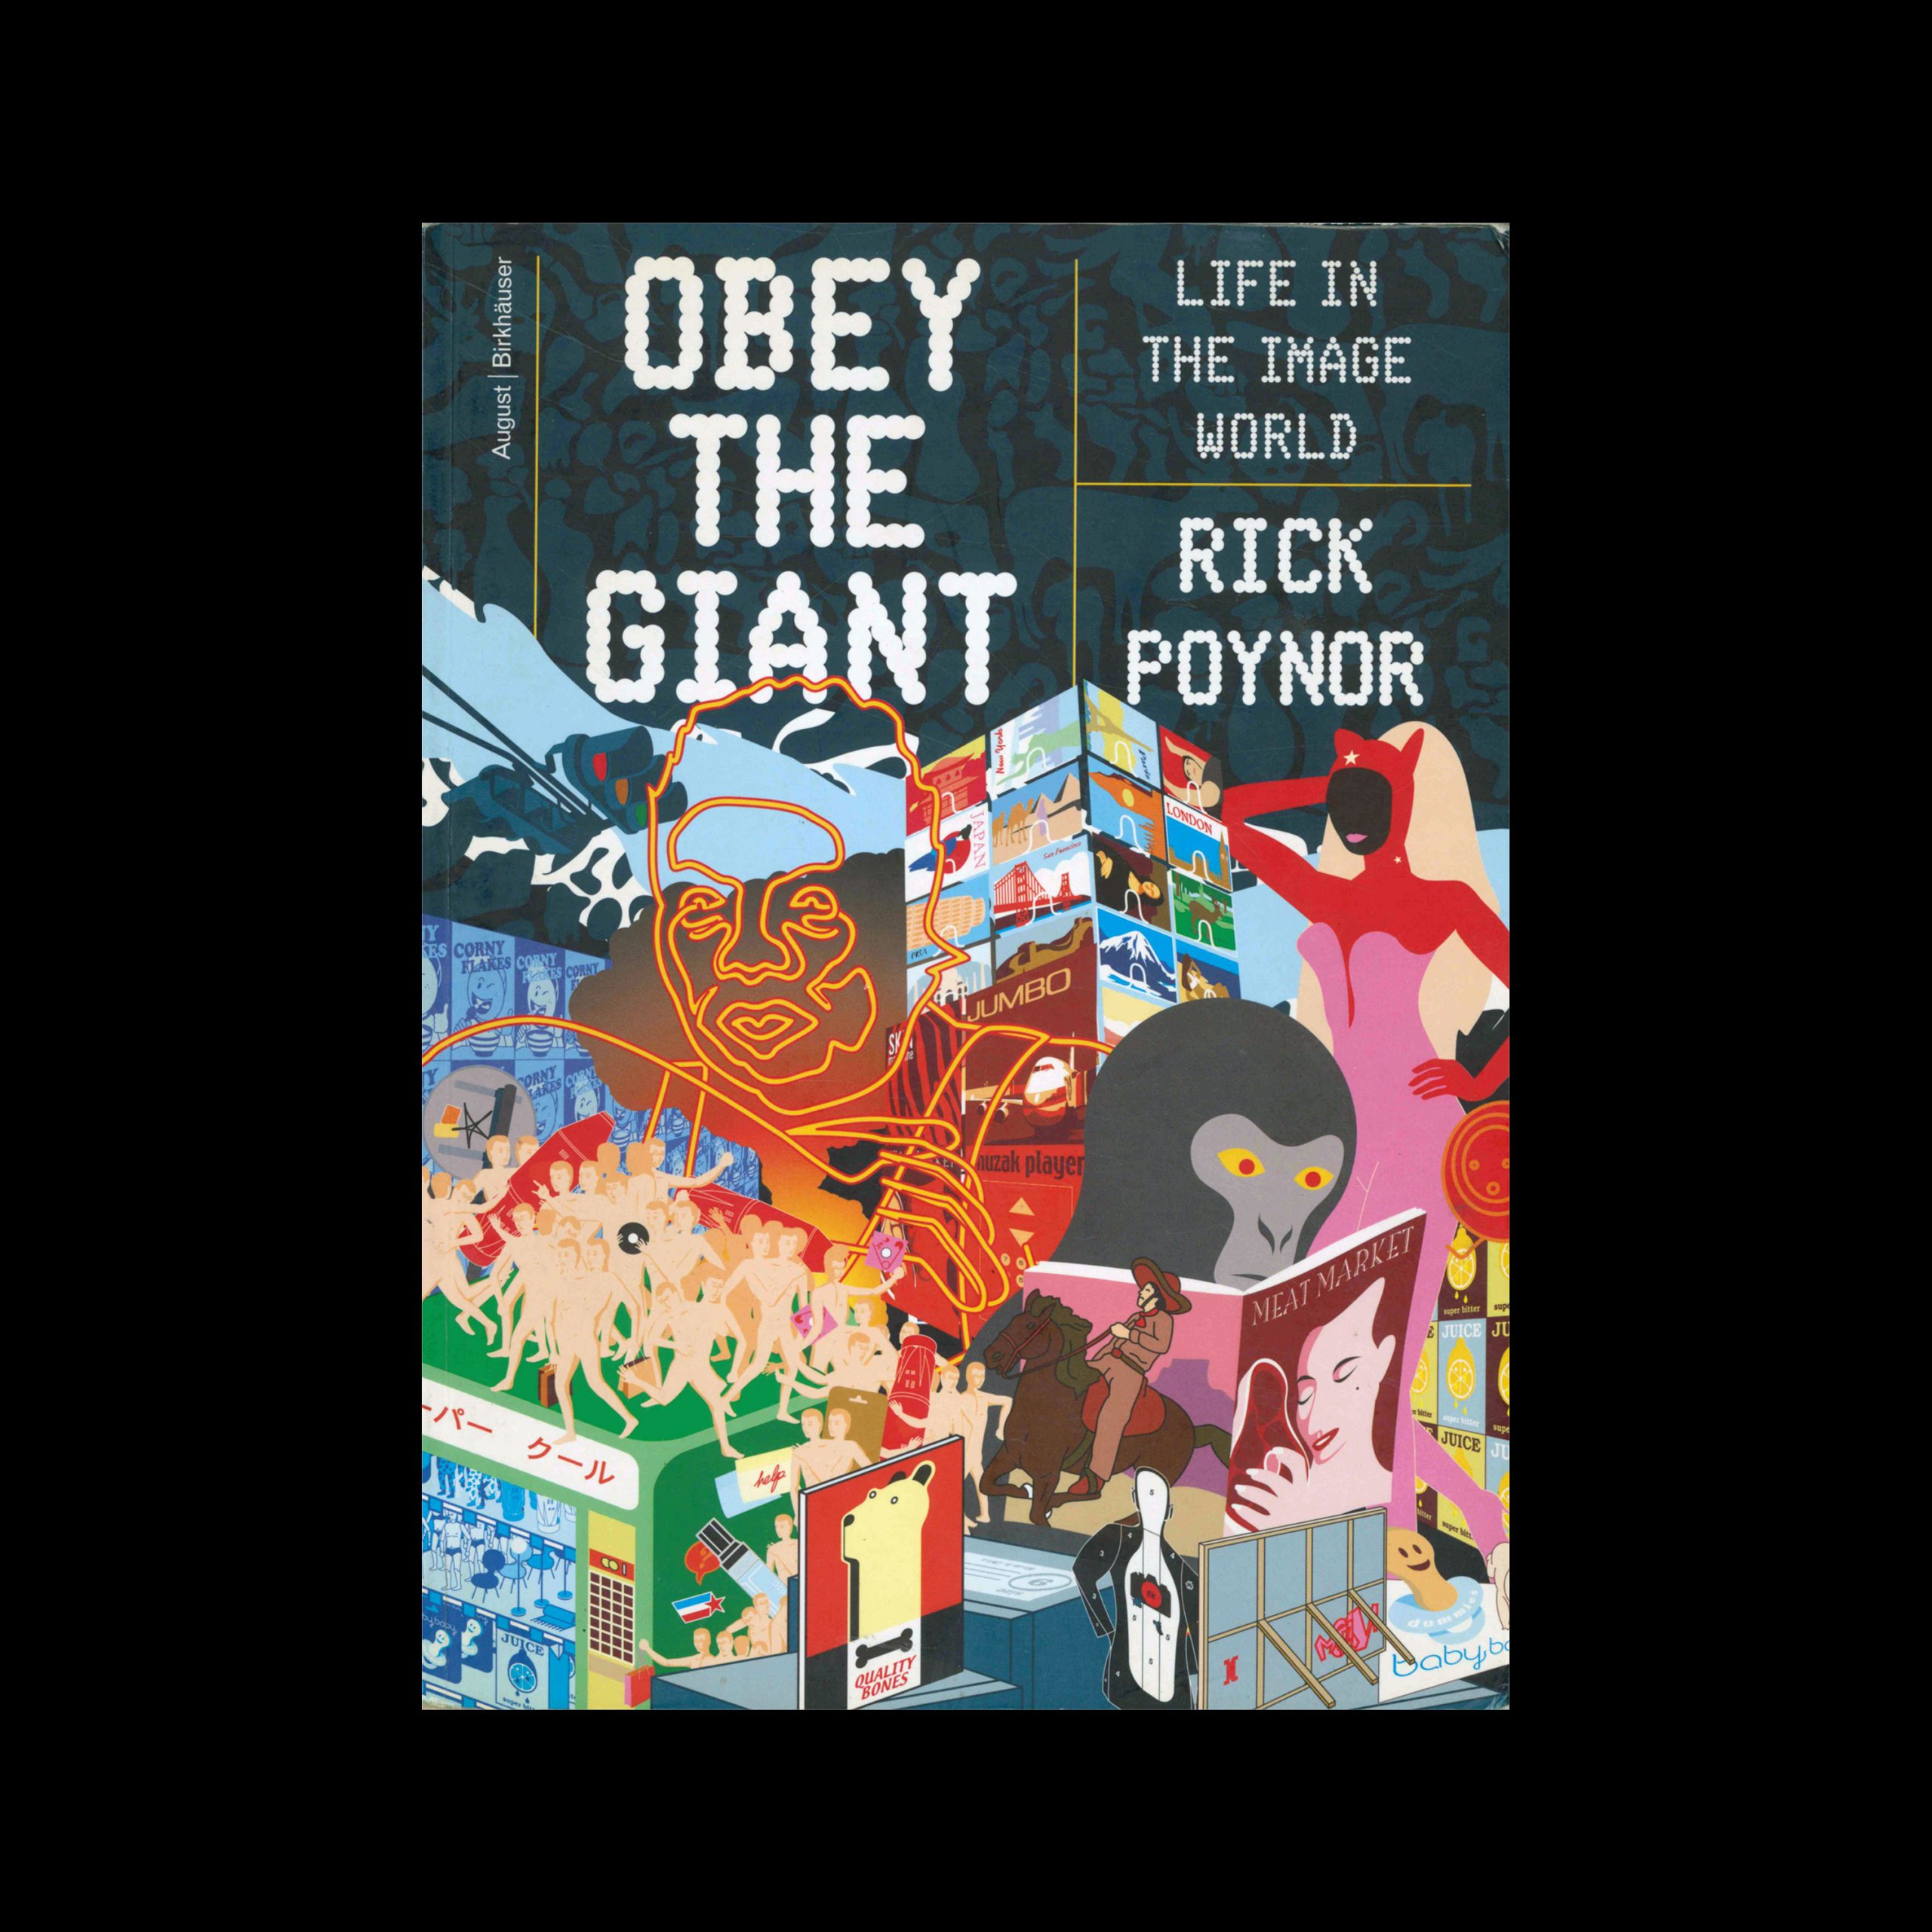 Obey the Giant - Life in the Image World, 2007